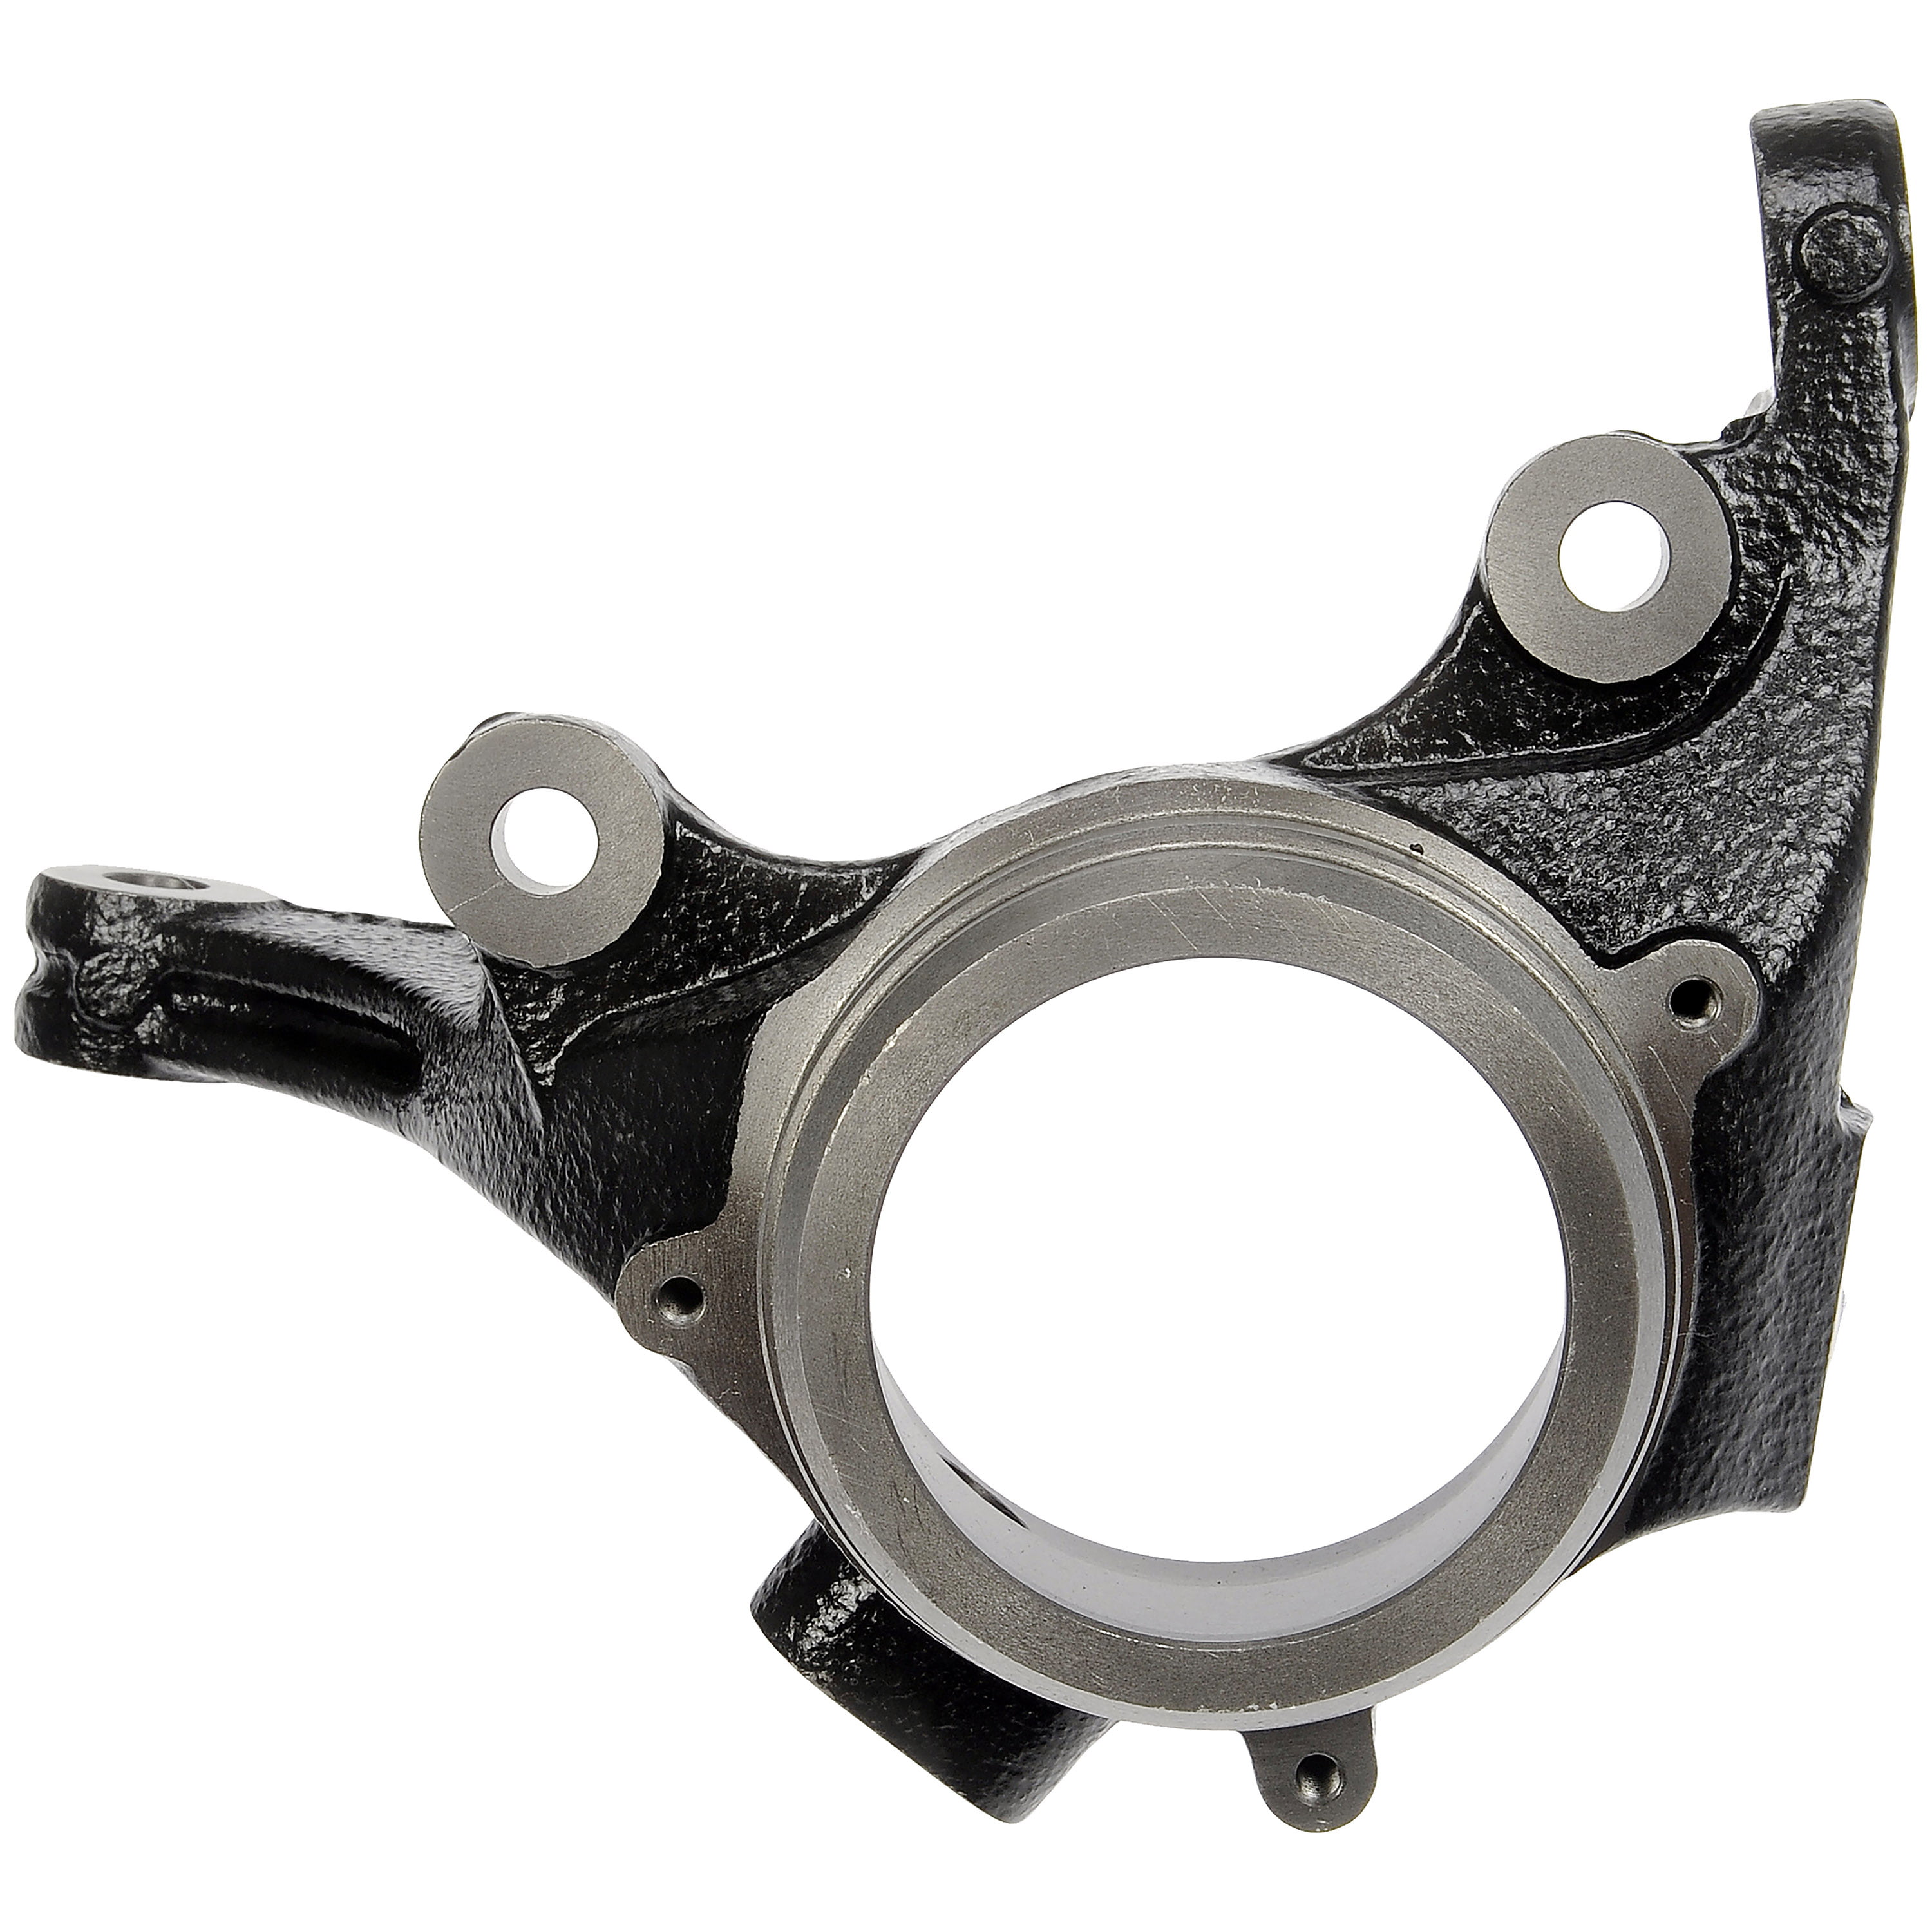 Dorman 697-985 Front Driver Side Steering Knuckle for Specific Hyundai  Models Fits 2013 Hyundai Sonata